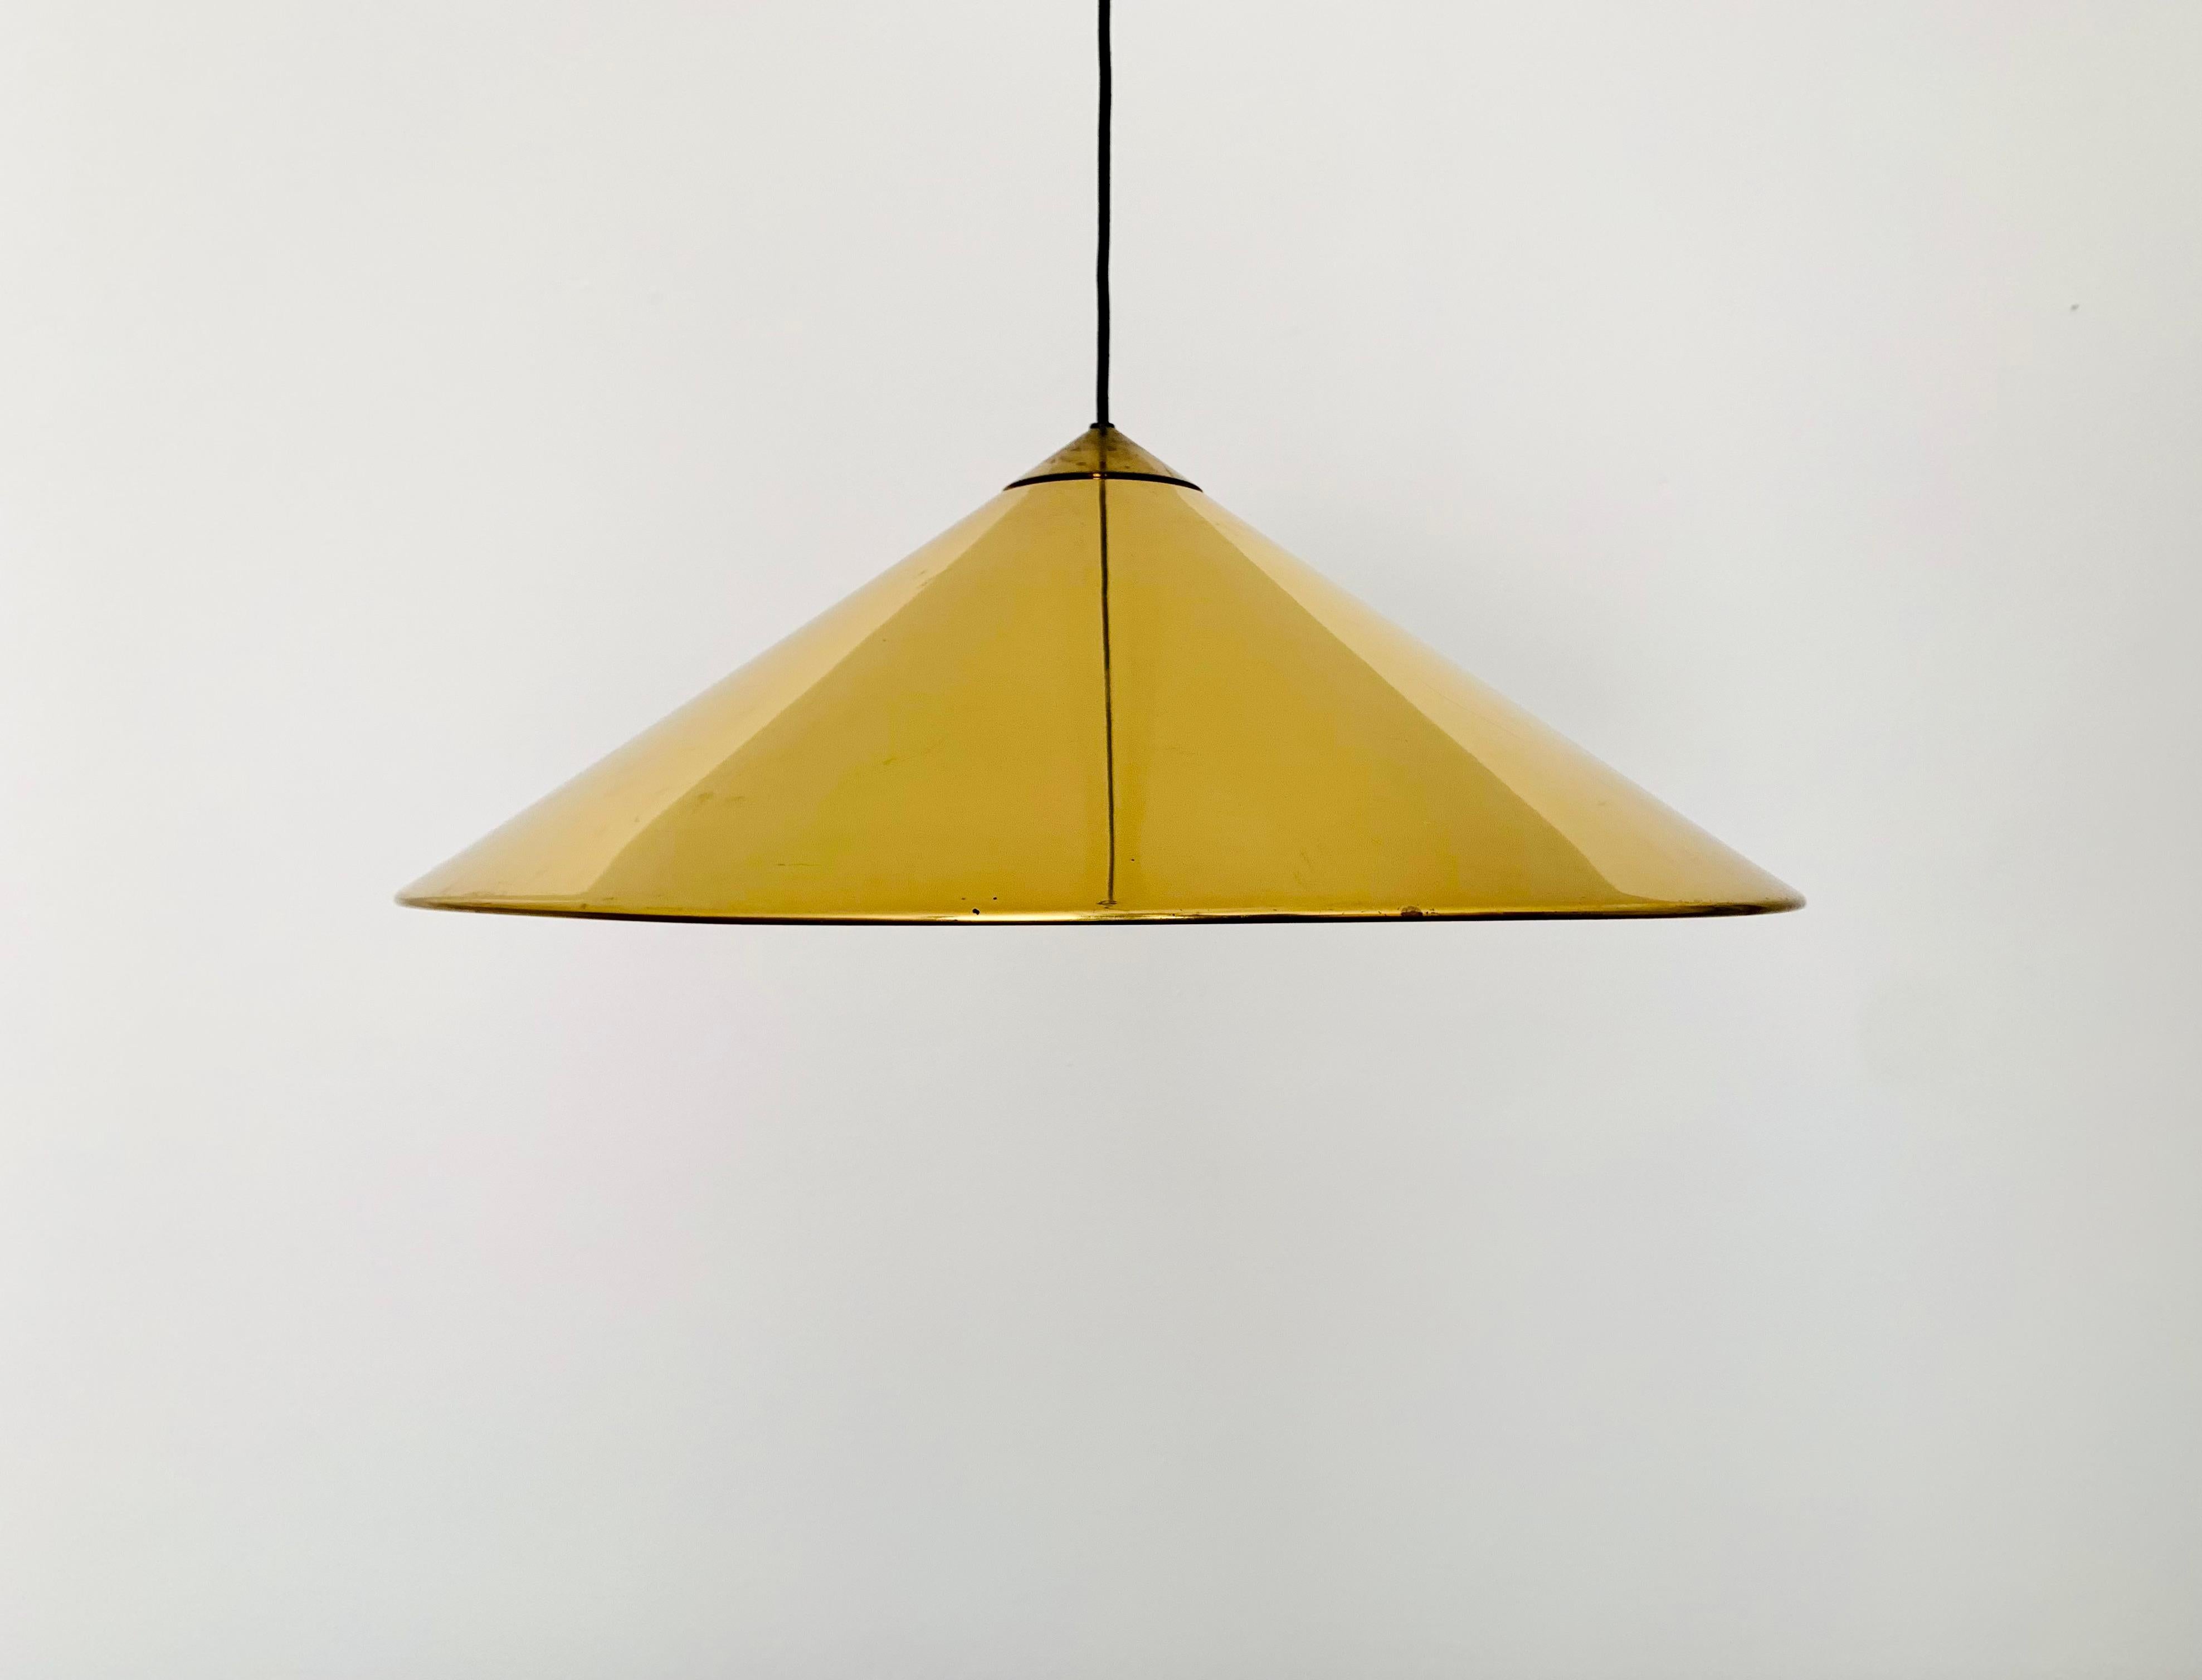 Very nice brass pendant lamp from the 1960s.
The lighting effect of the lamp is extremely beautiful.
The design and the very beautiful details create a very noble and pleasant light.
The lamp creates a very cozy atmosphere and is of very high